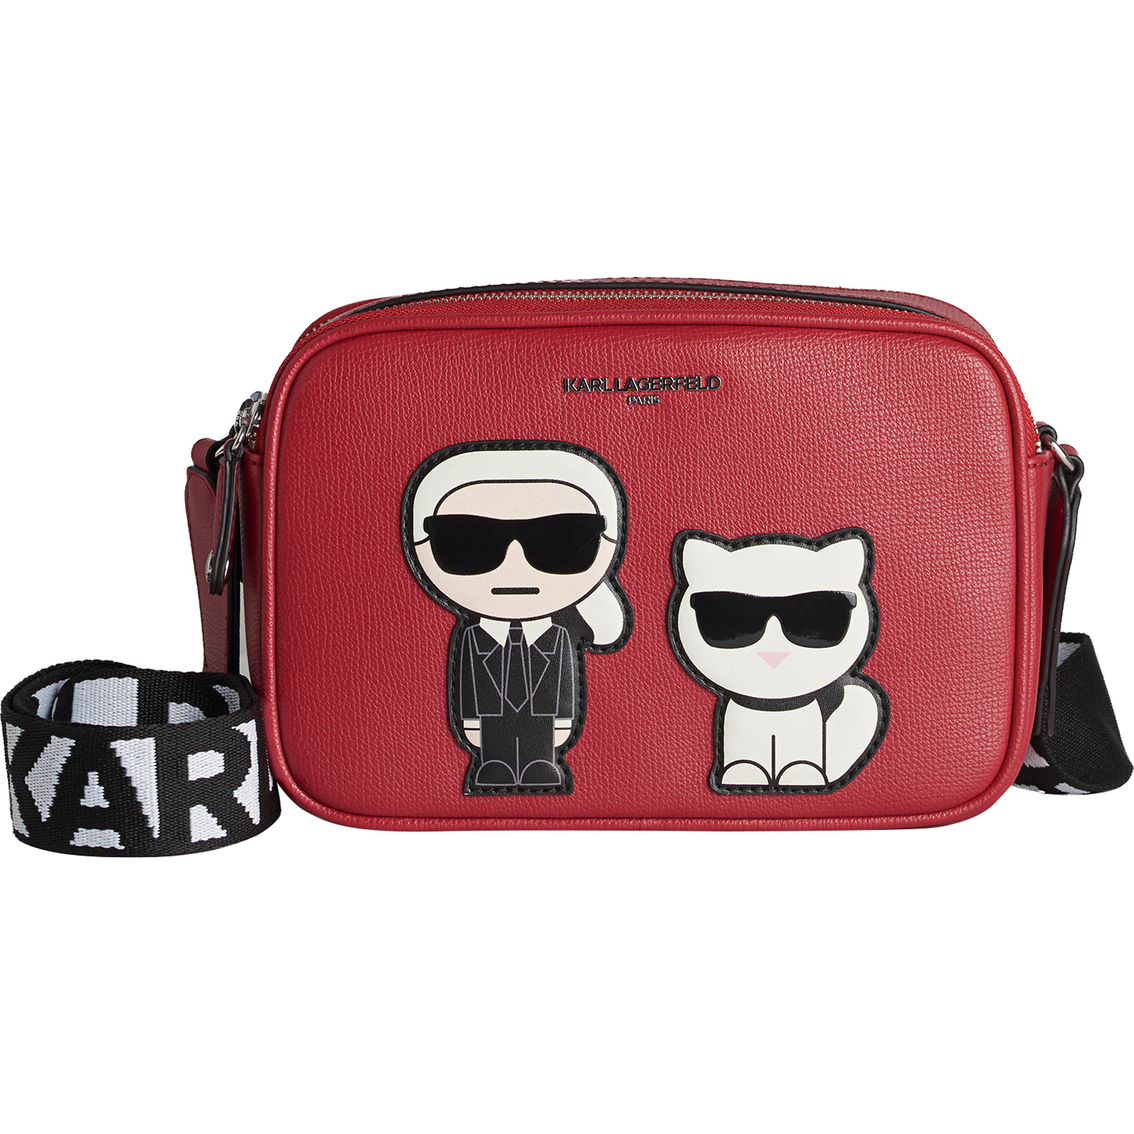 Karl Lagerfeld Maybelle Camera Bag | Shoulder Bags | Clothing & Accessories | Shop The Exchange